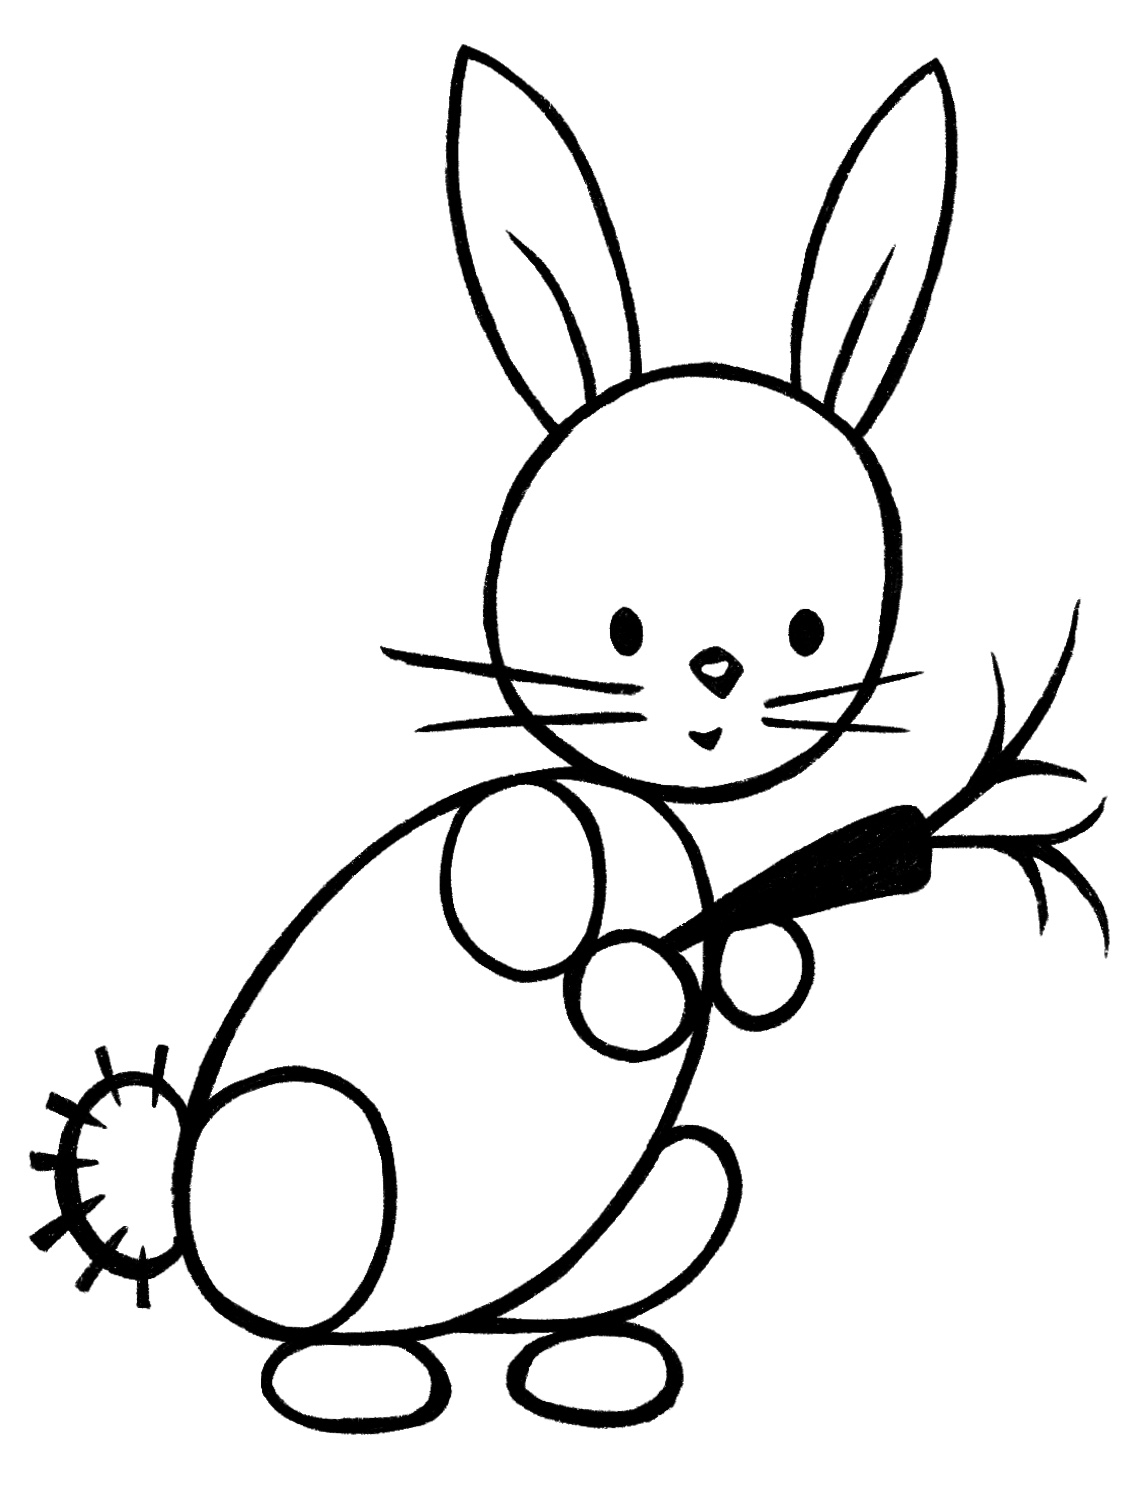 Animal Line Drawing Vector Hd Images Line Drawings Keep On Rabbit Animals  Simple Lines Outline Bunny Symbol PNG Image For Free Download